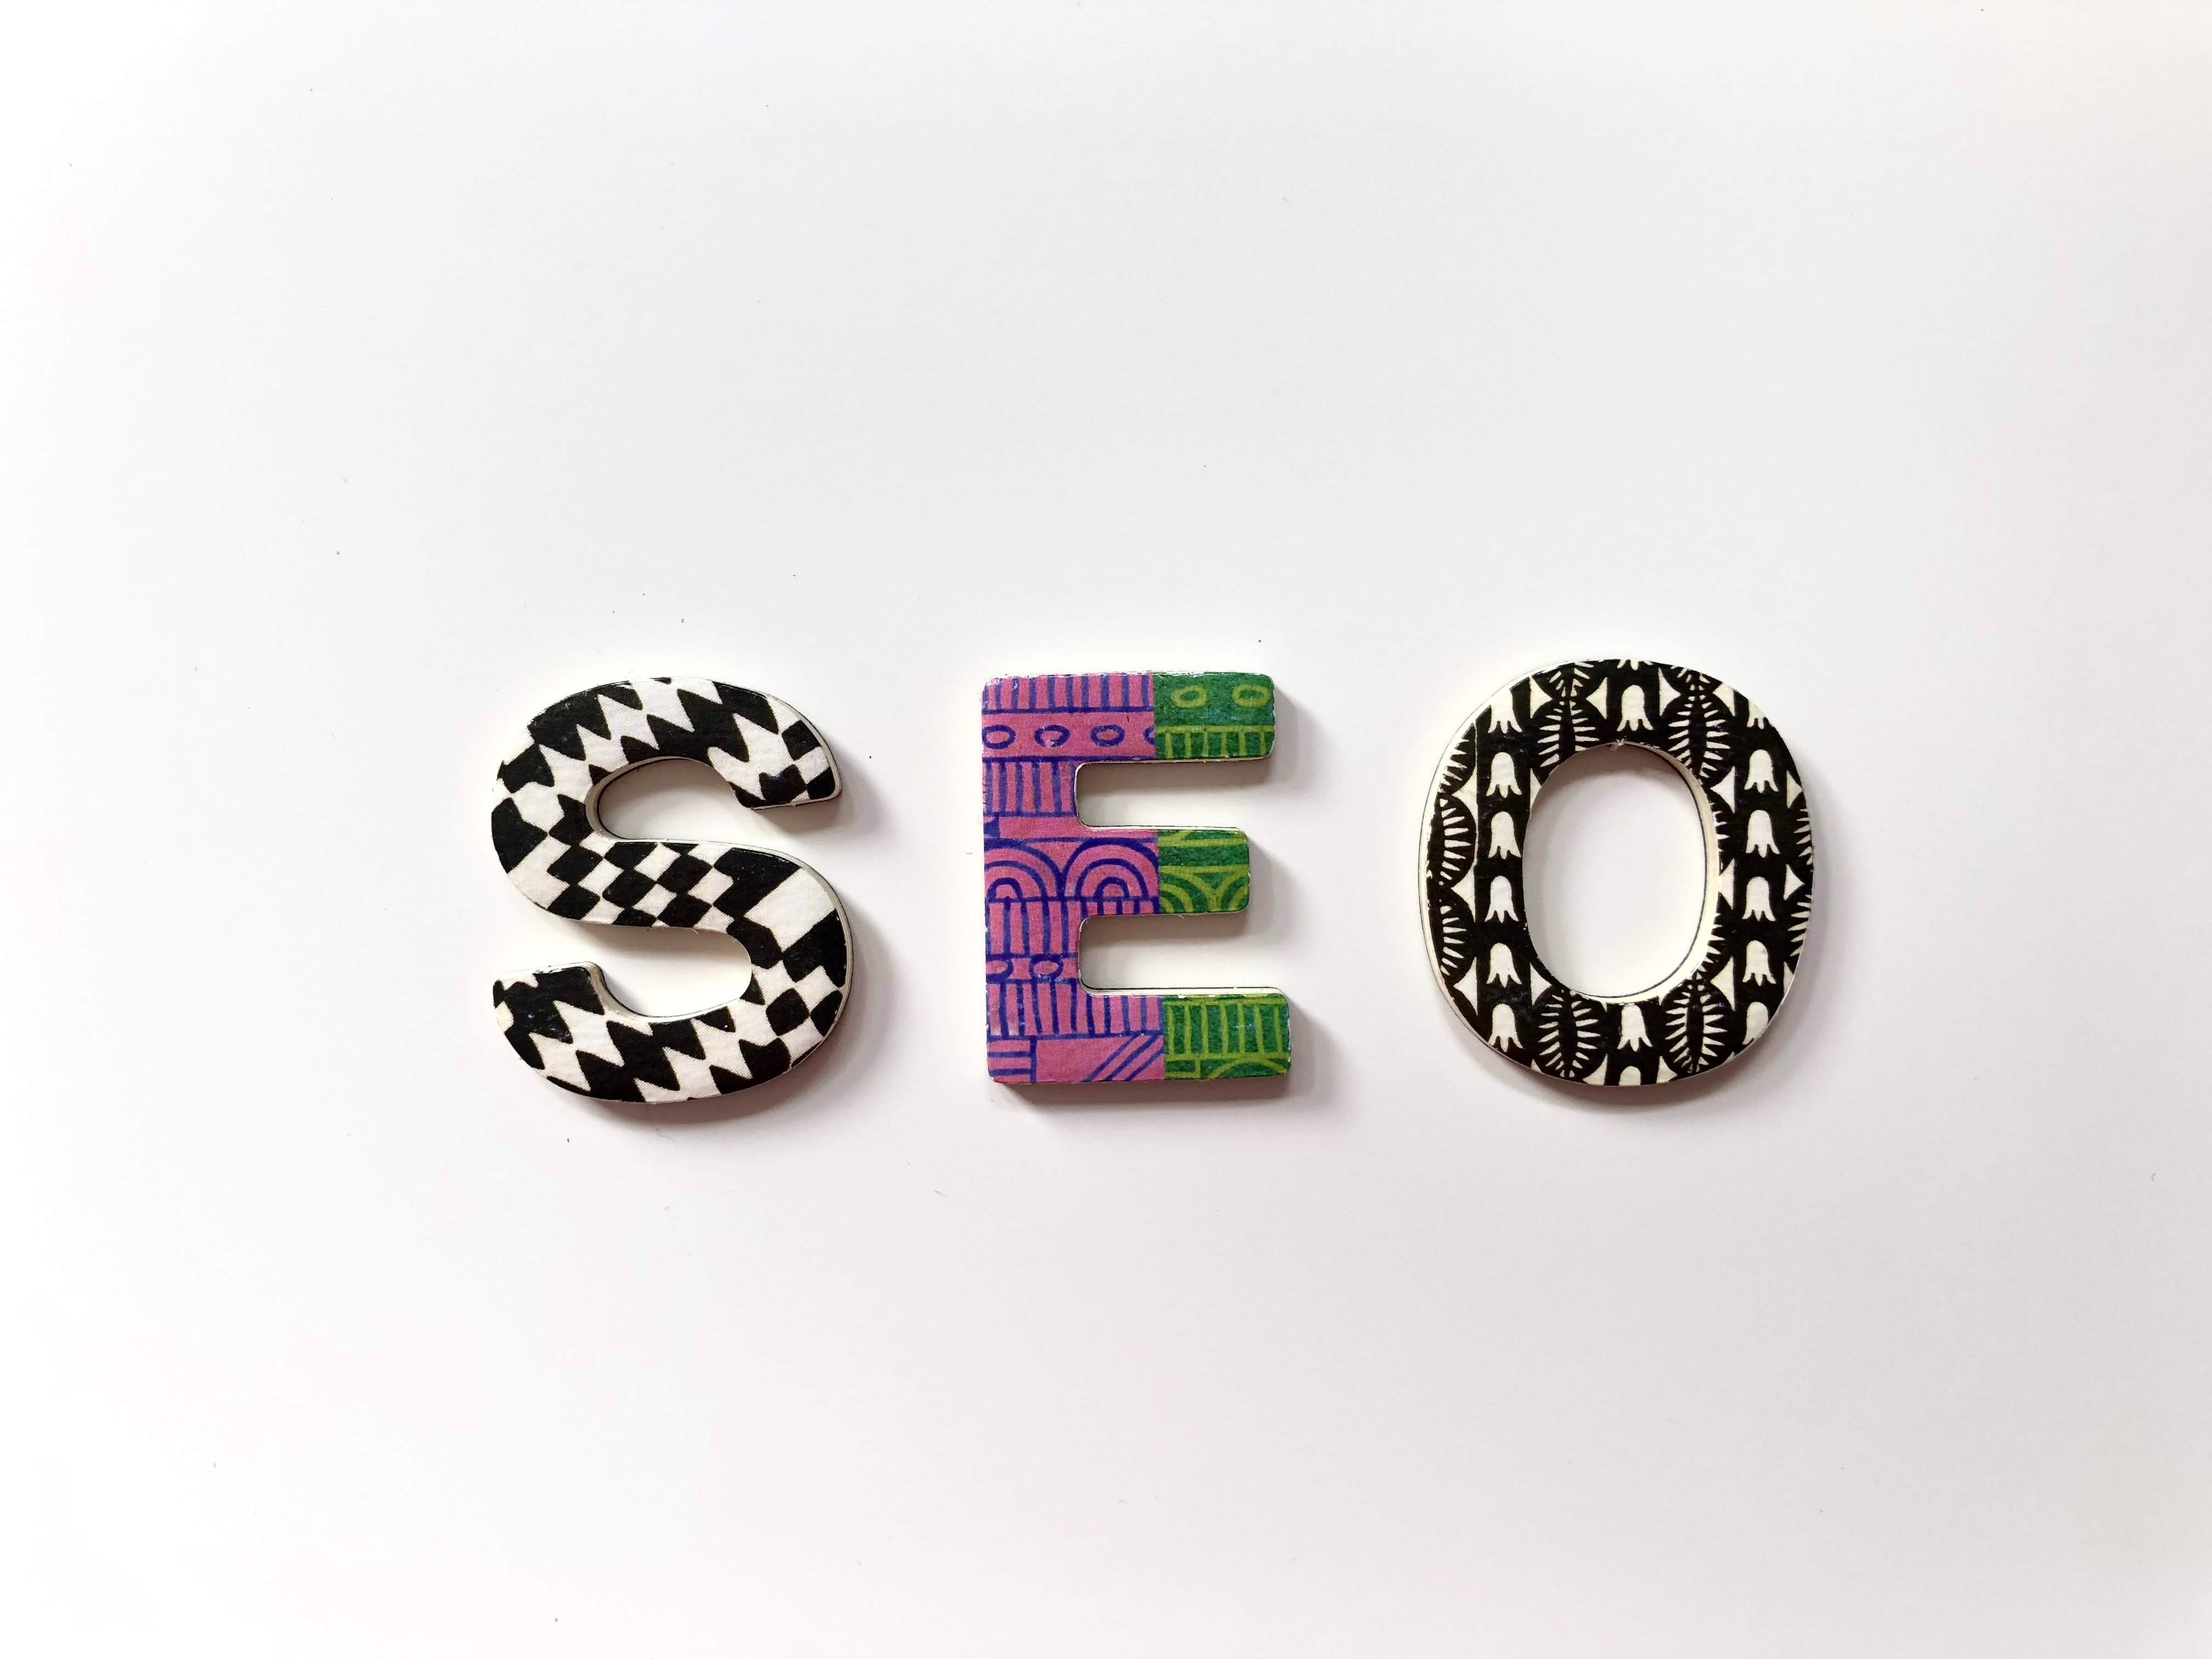 Why You Should Invest in SEO